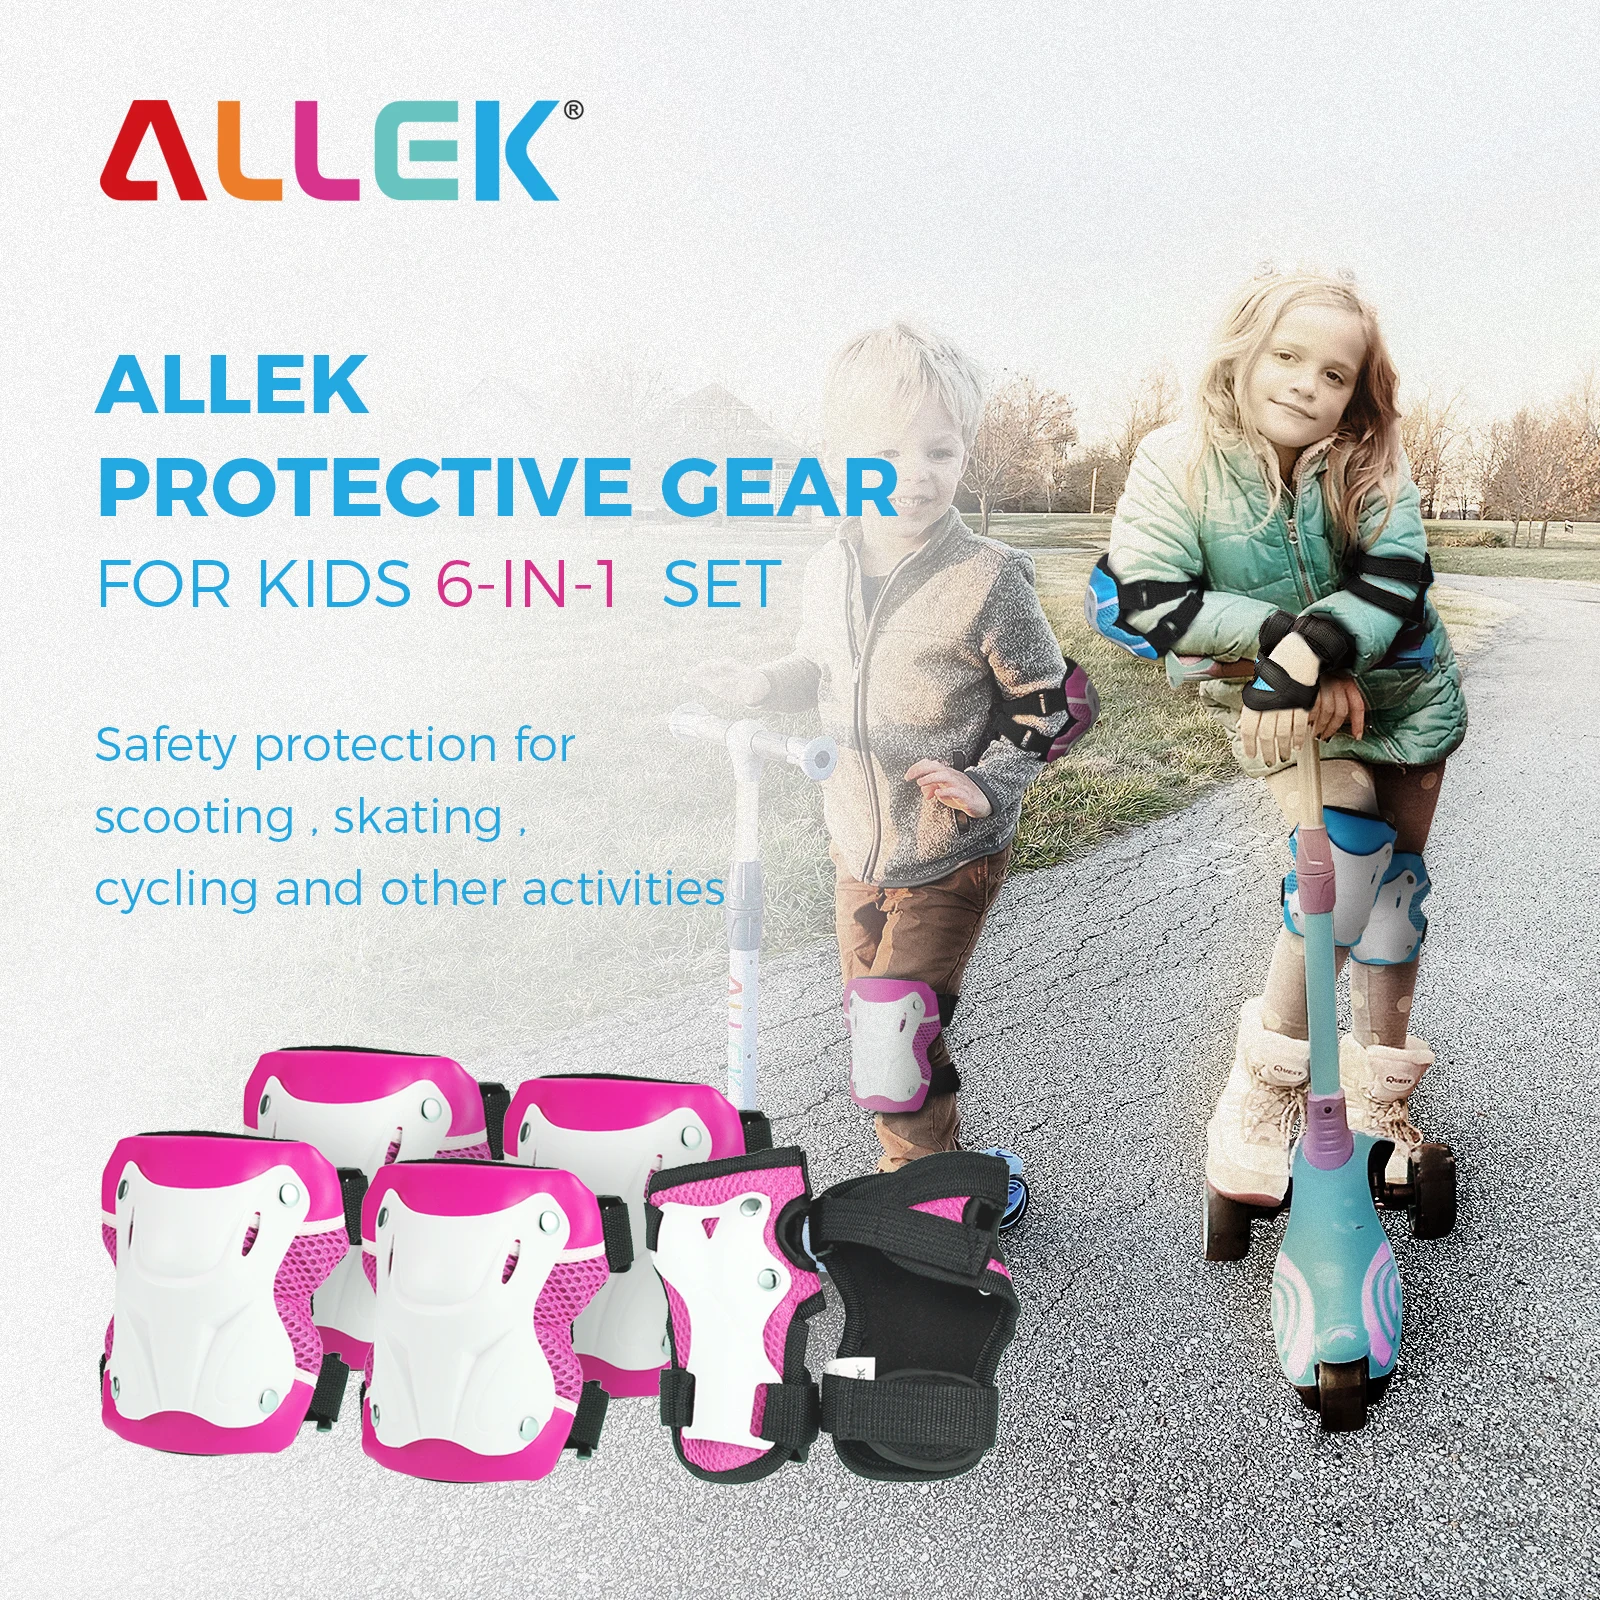 

Allek Protect Grear for Kid 6-in-1 set Knee Wrist Guards Elbow pads Bicycle Skateboard Scooter Ice Skating Roller Guard